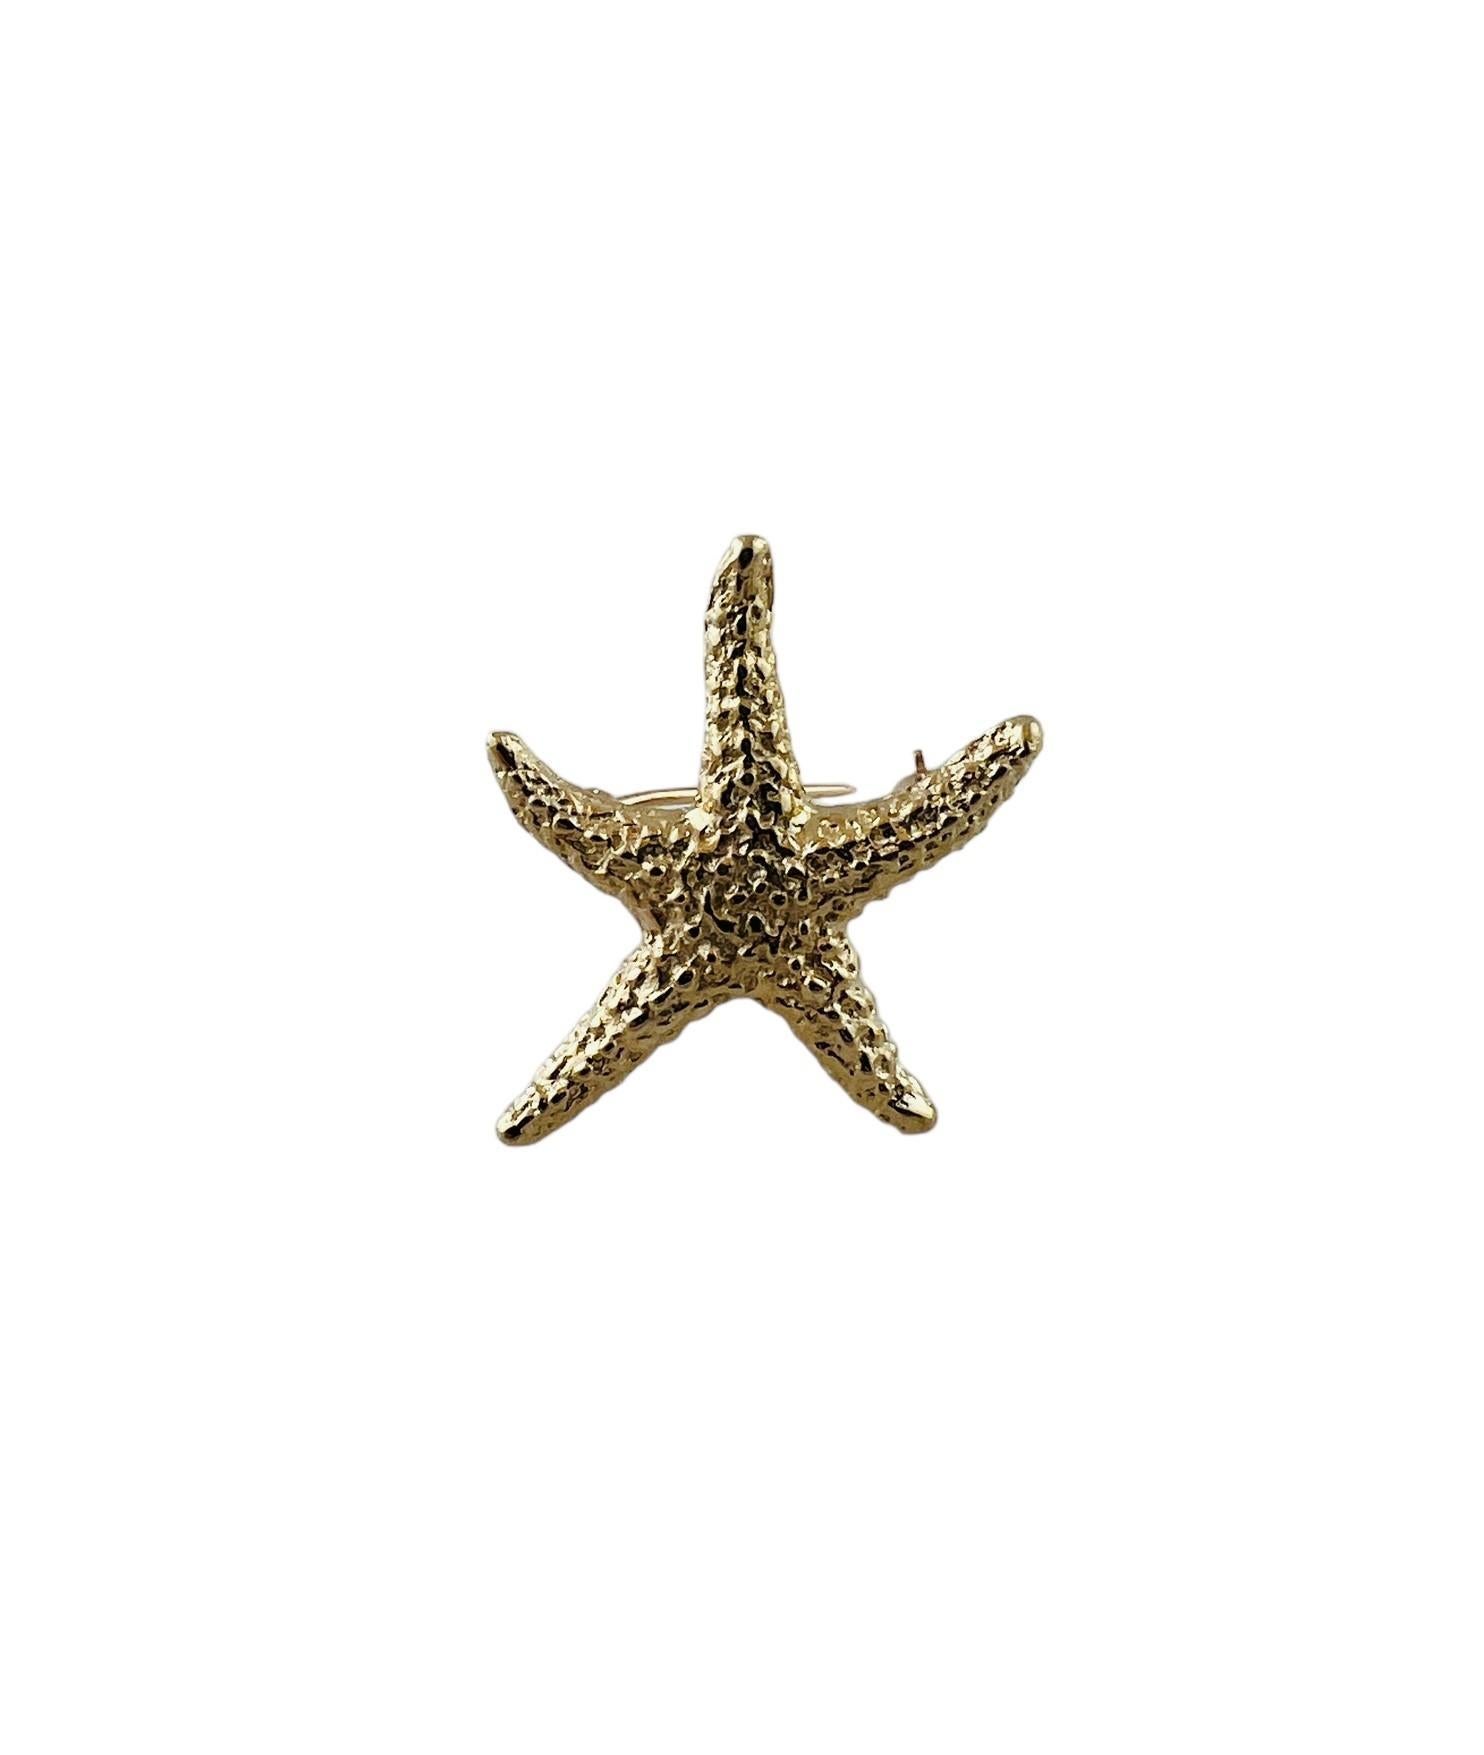 14K Yellow Gold Textured Starfish Pin #15554 For Sale 4